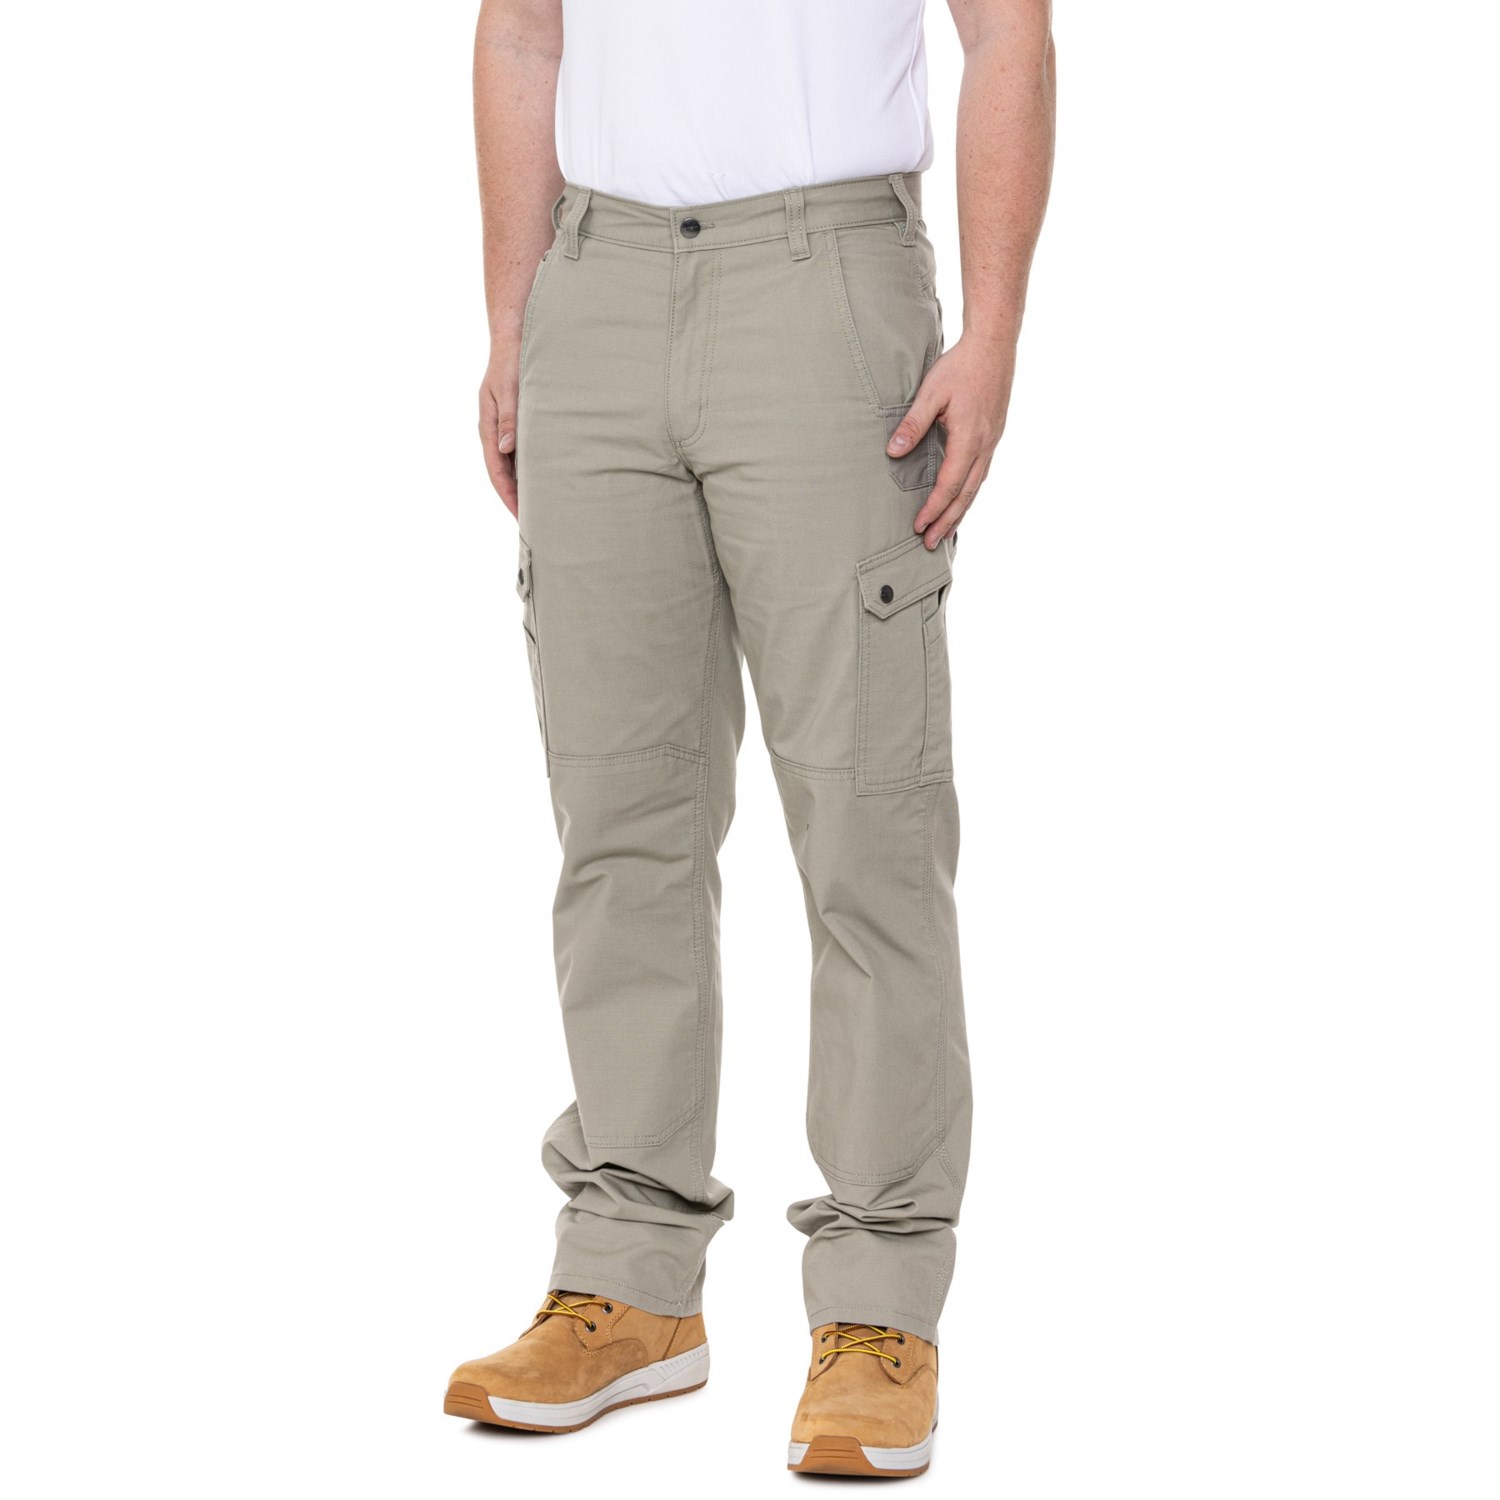 Carhartt 105461 Rugged Flex Relaxed Fit Ripstop Cargo Pants for Men | Greige | Size 32/34 | Cotton